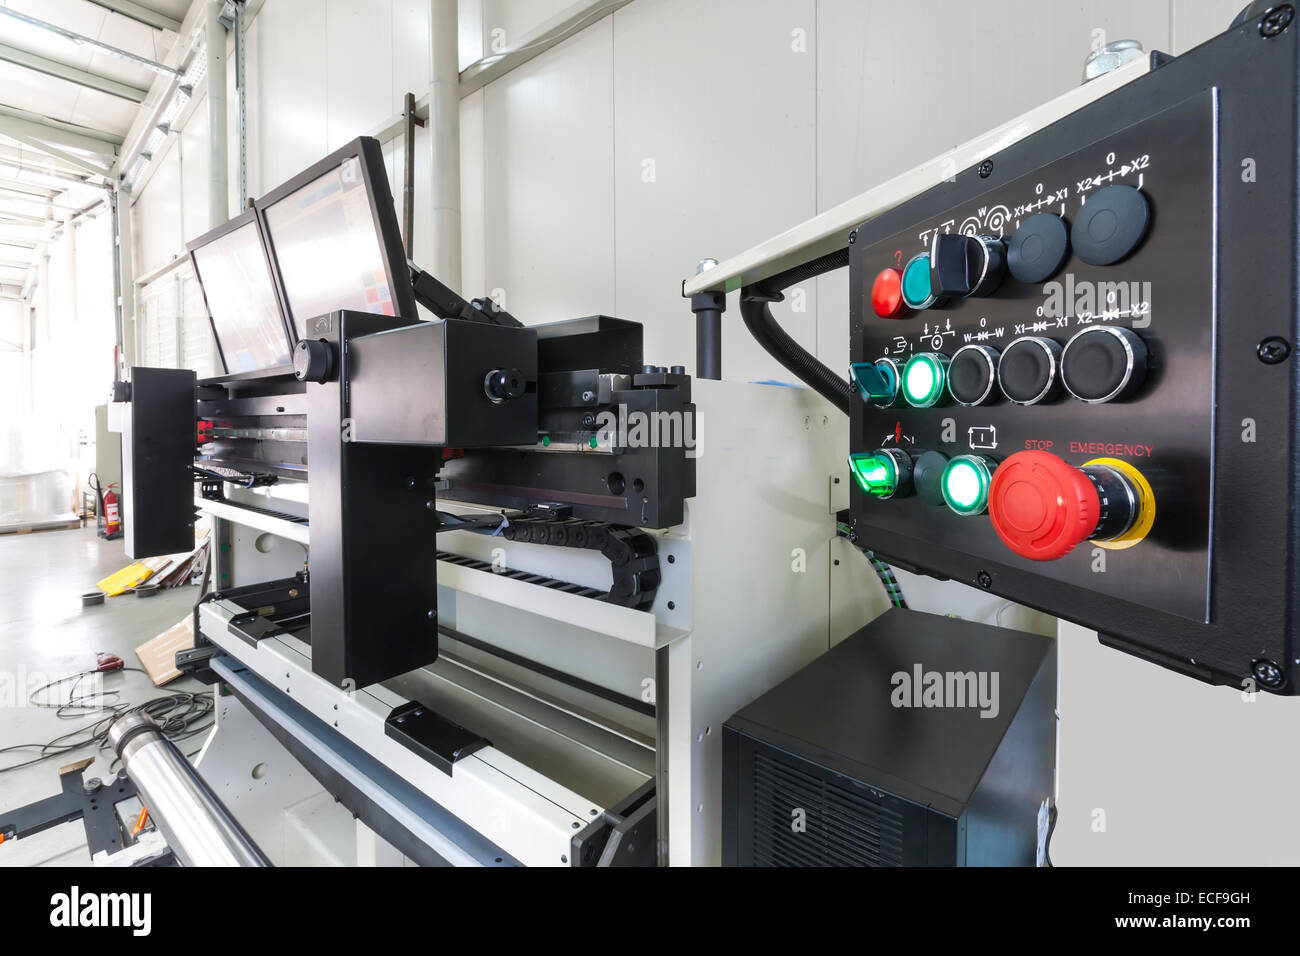 Offset printer for labels and flexible packaging, Stock Photo